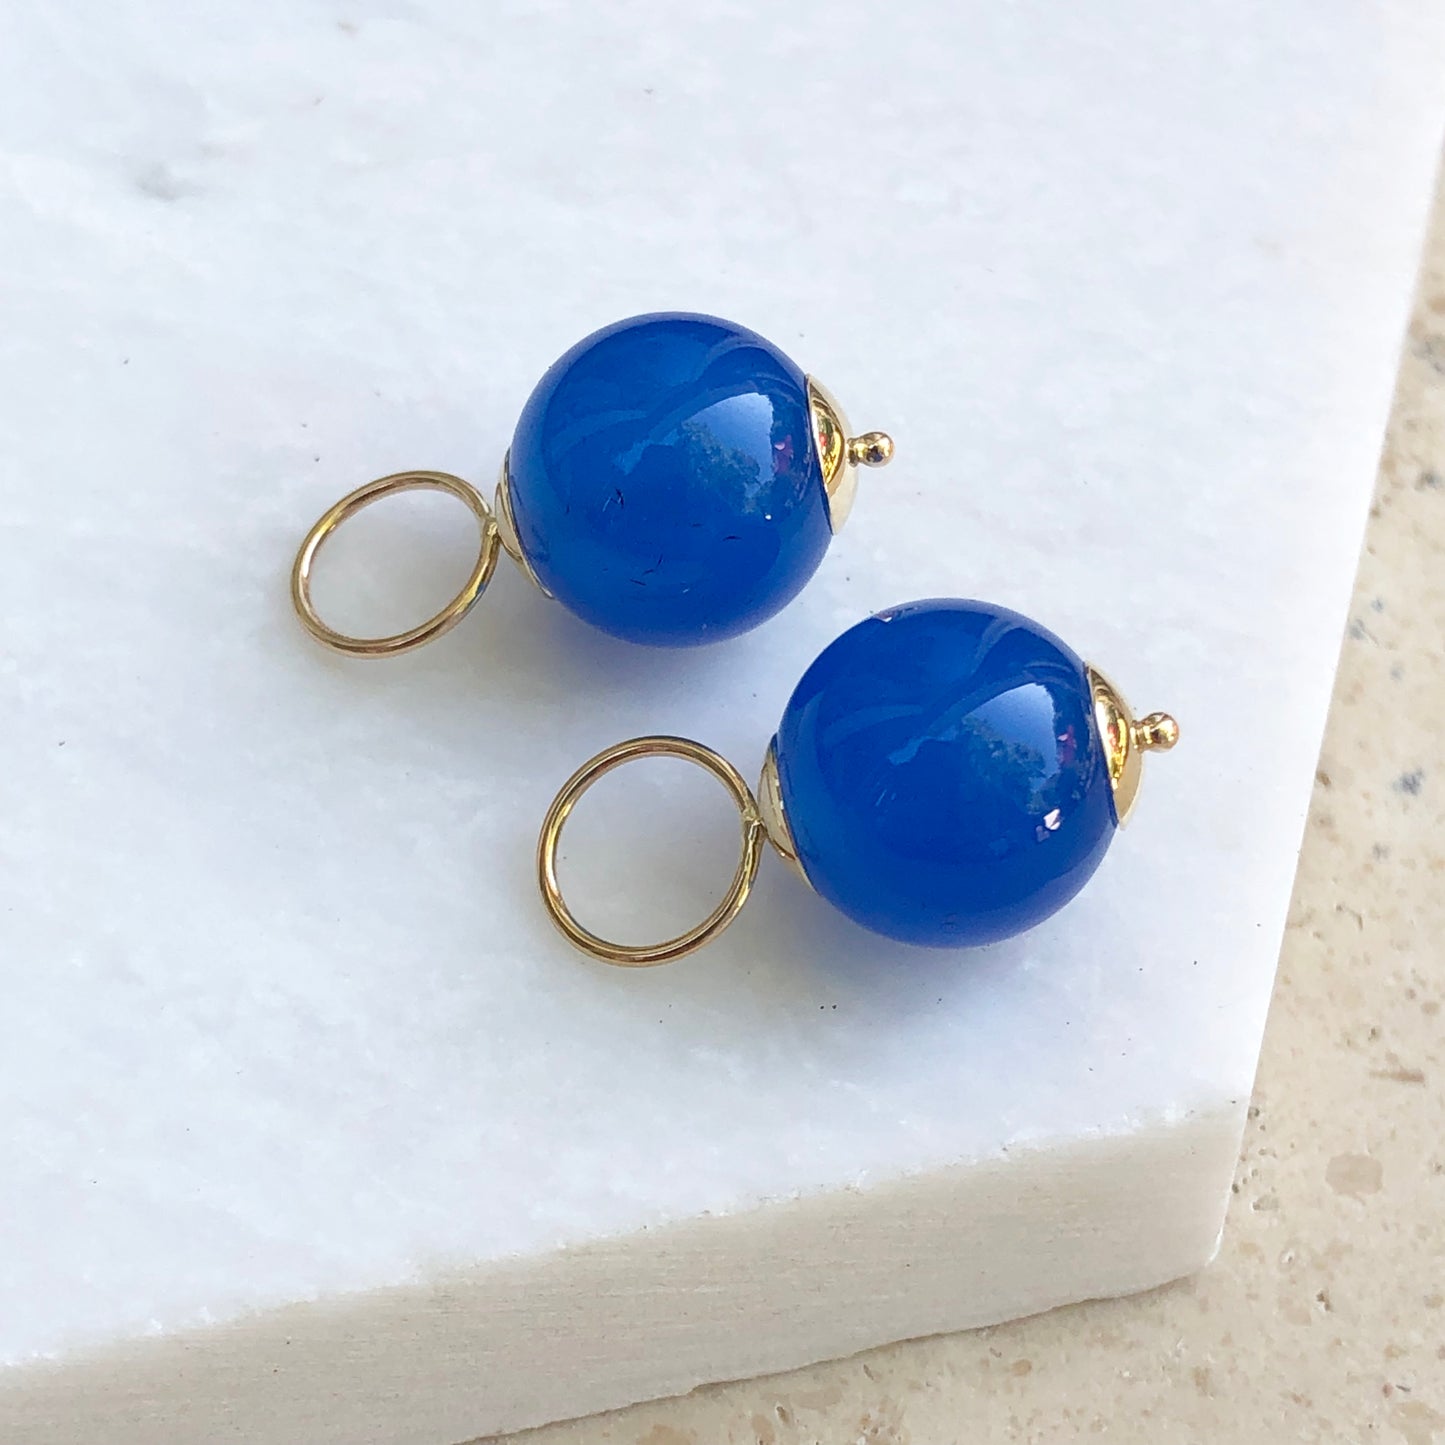 14KT Yellow Gold + Blue Onyx Ball Earring Charms, 14KT Yellow Gold + Blue Onyx Ball Earring Charms - Legacy Saint Jewelry